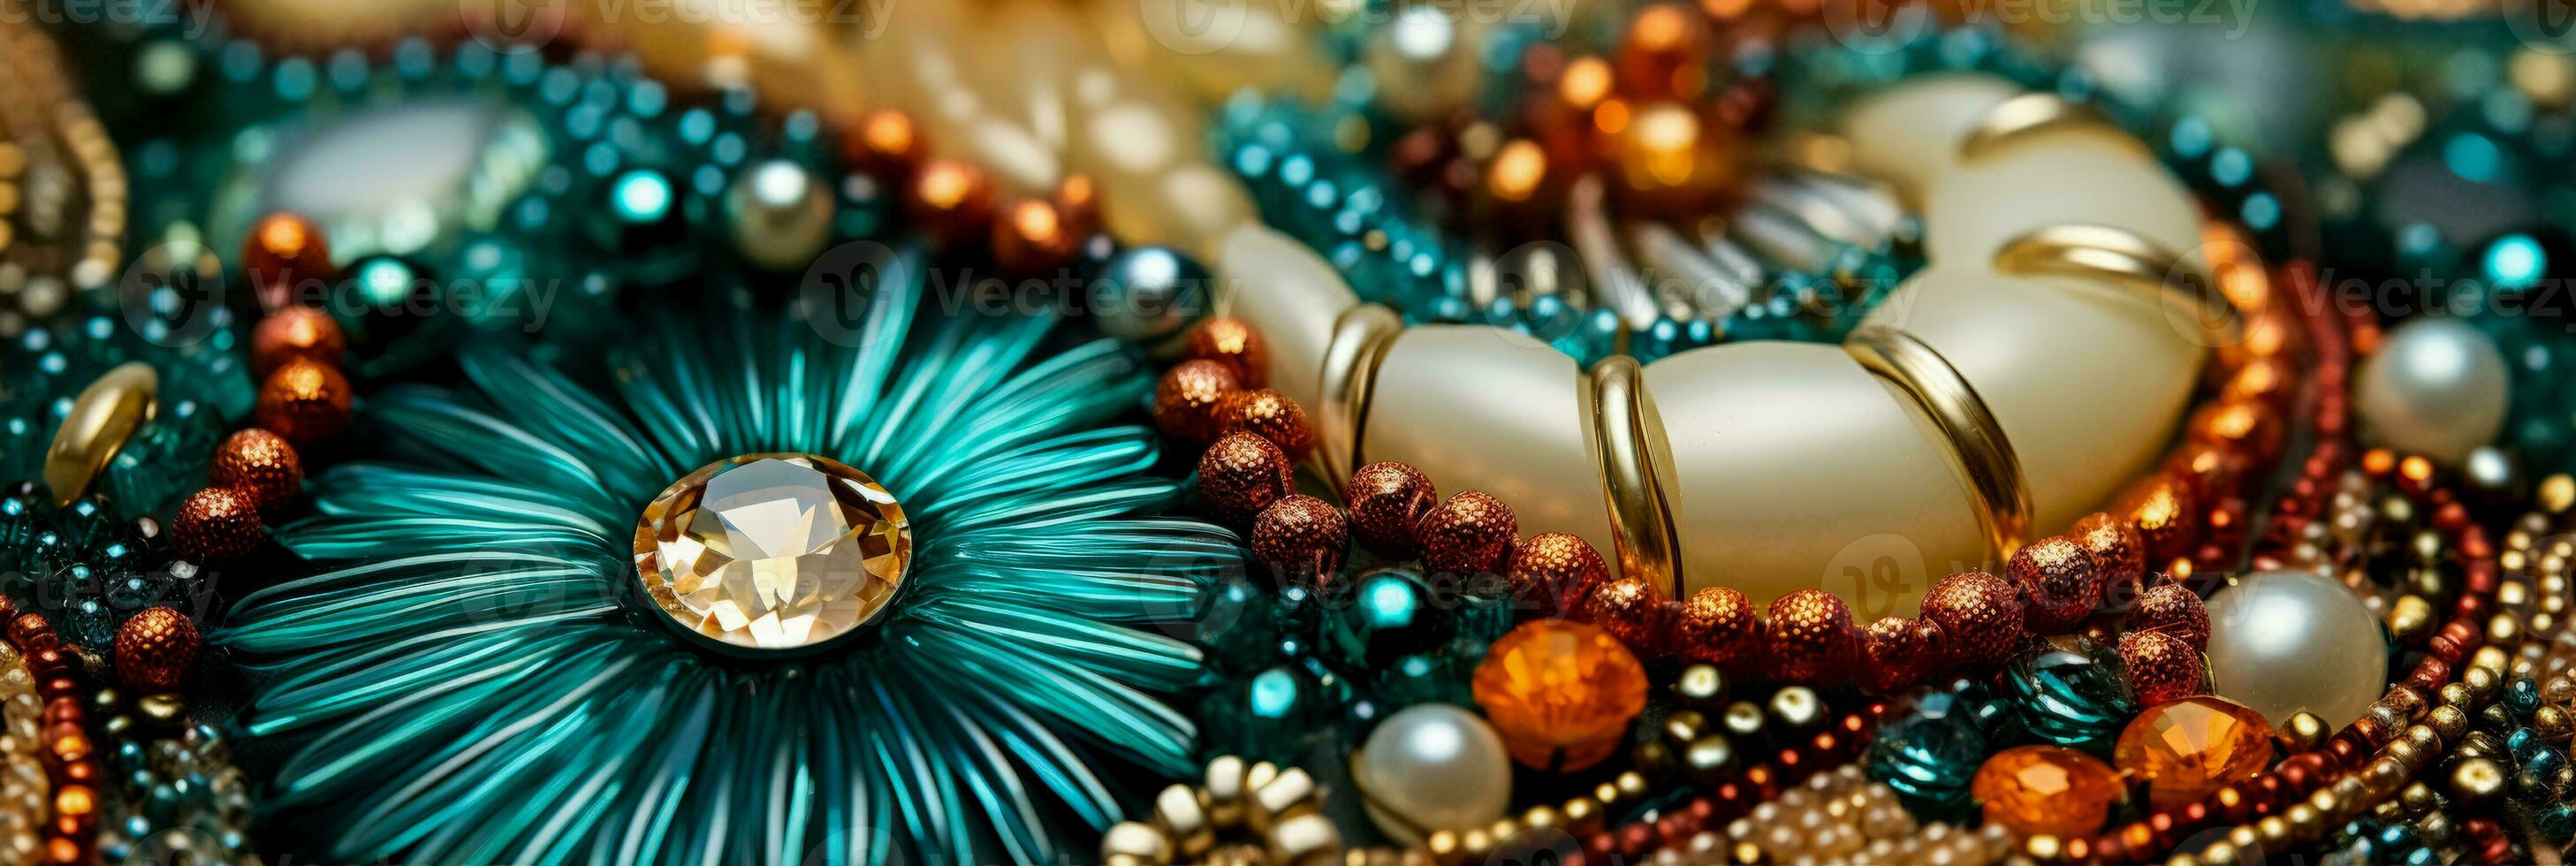 Macro photography showcasing bead embroidery details on diverse textile backgrounds photo